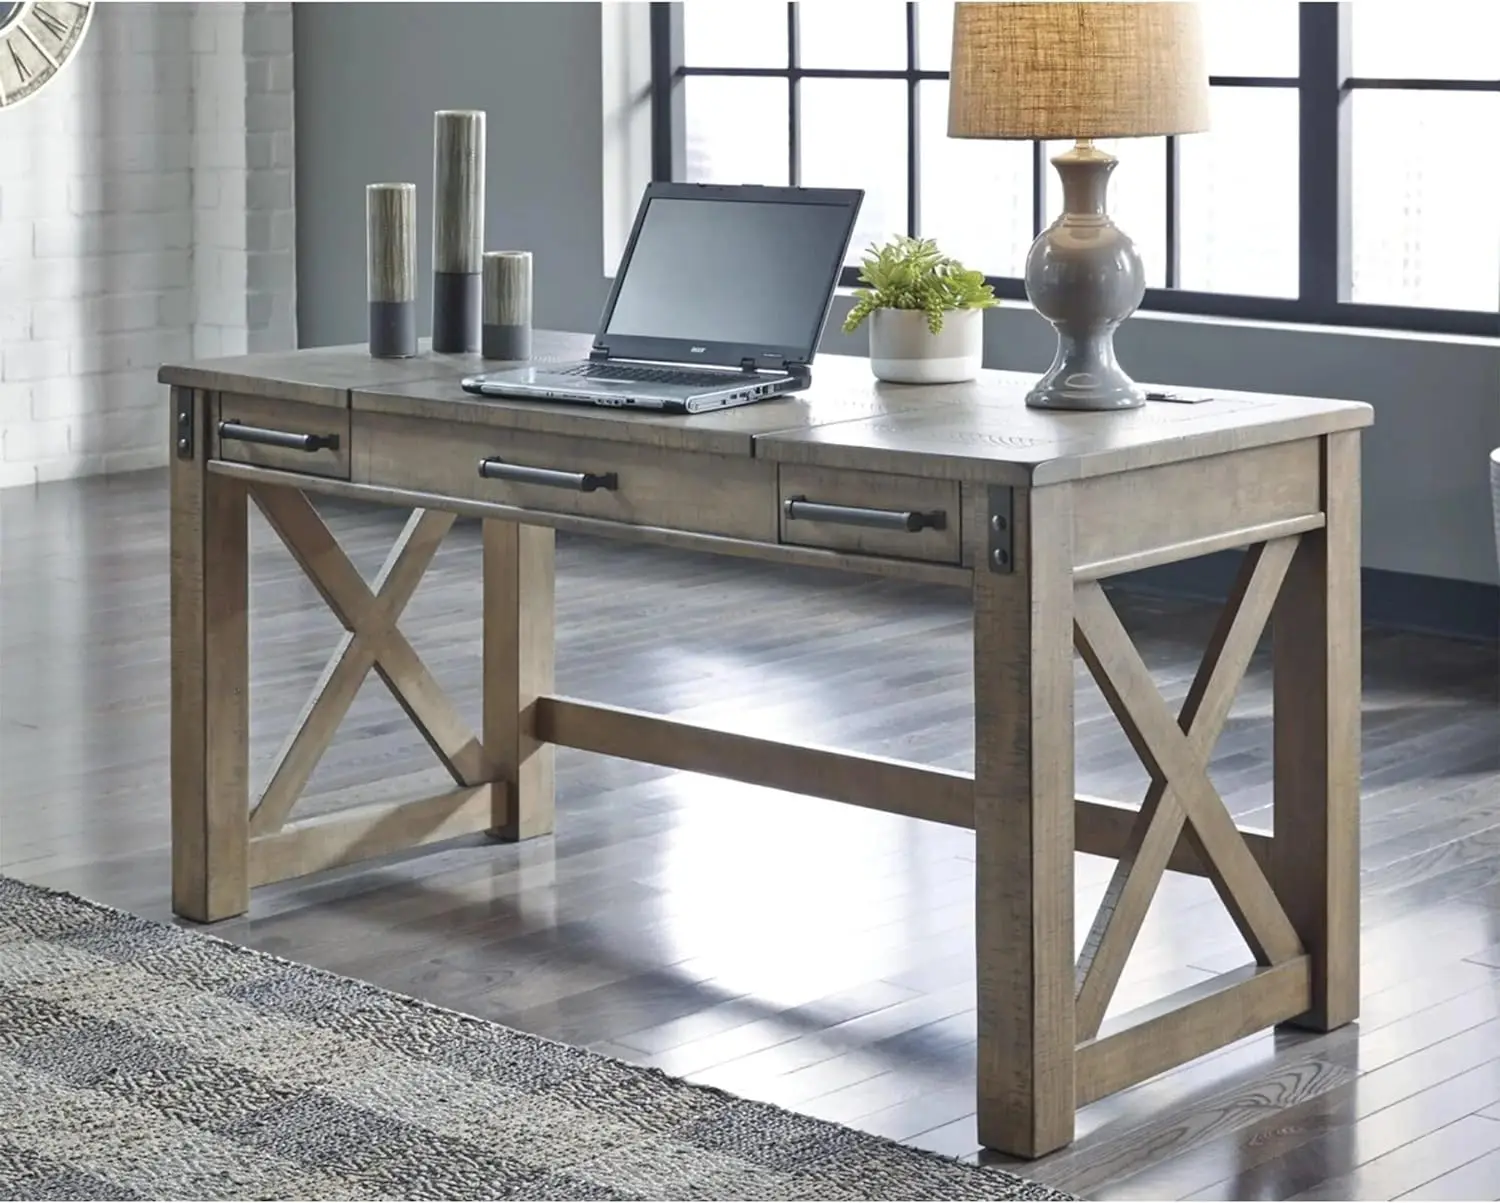 

Signature Design by Ashley Aldwin Rustic Farmhouse 60" Home Office Lift Top Desk with Charging Ports, Distressed Gray